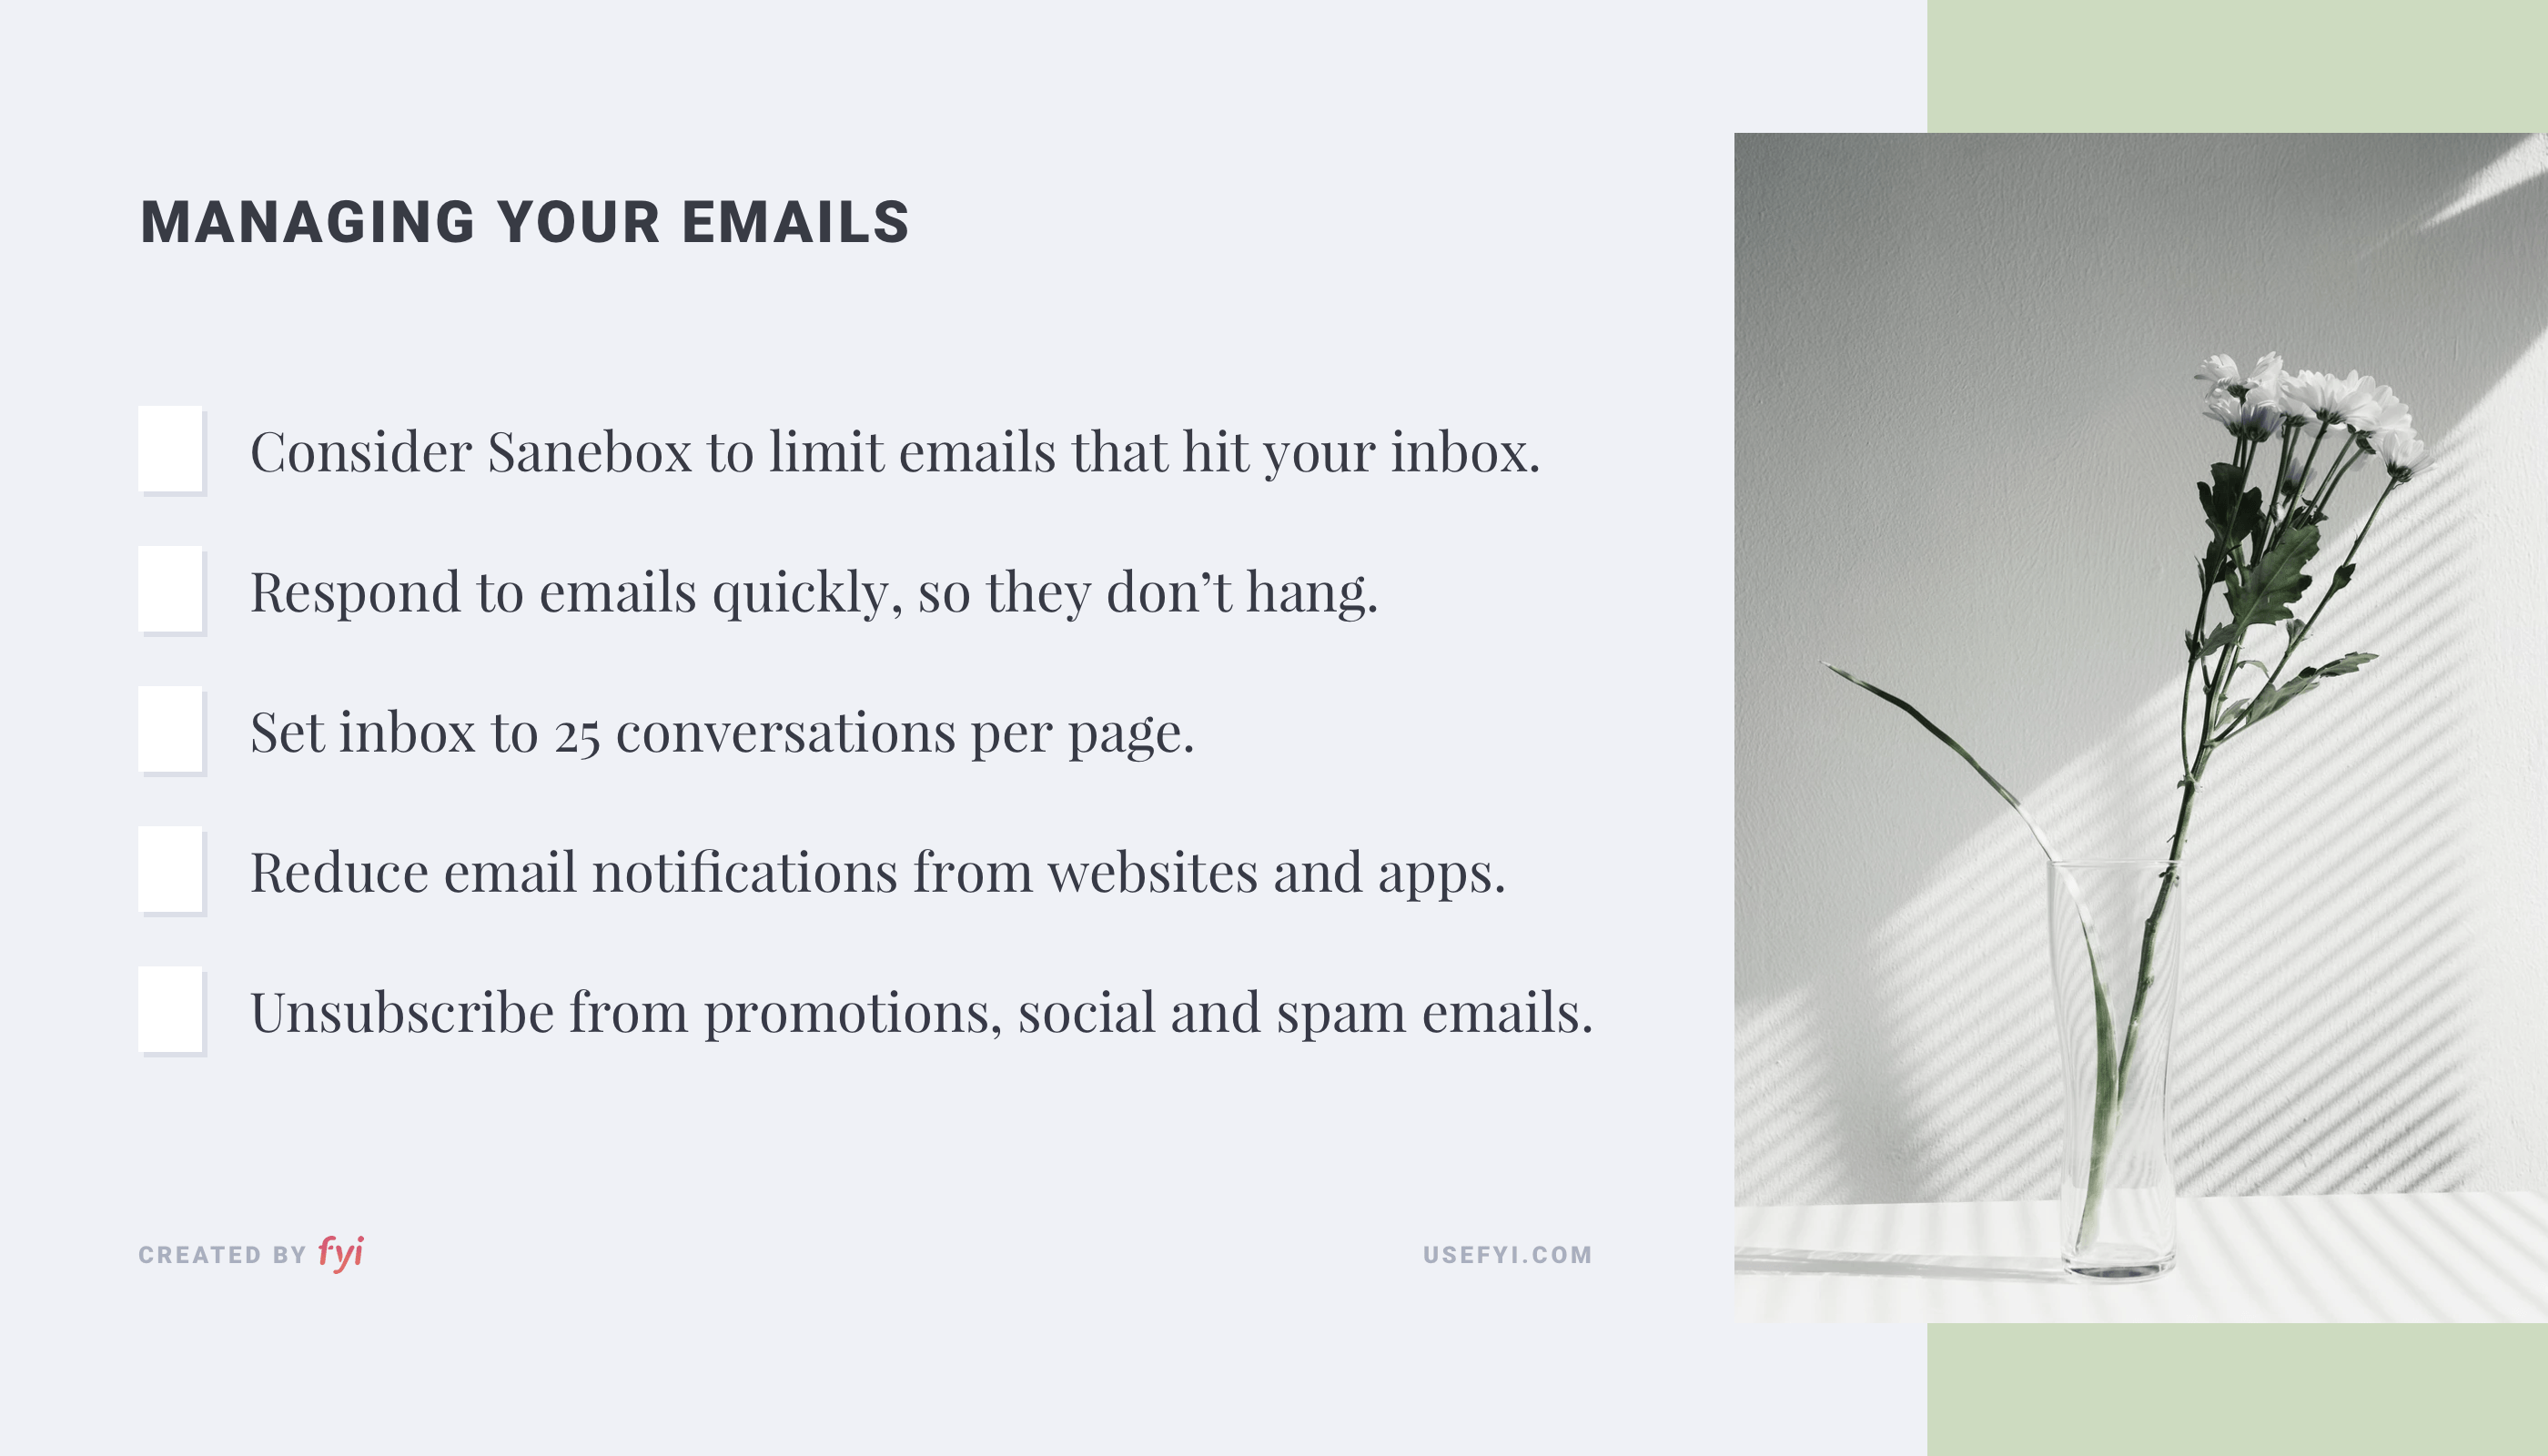 Managing your emails